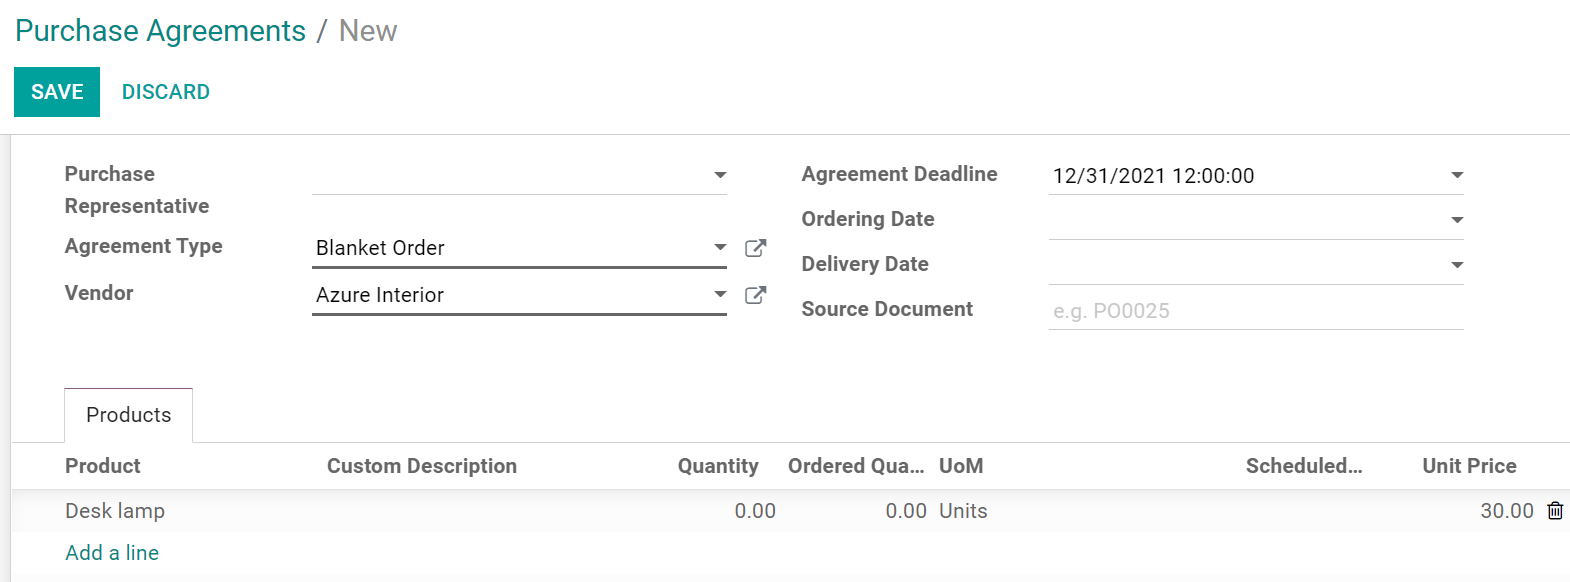 Set up a blanket order in Odoo Purchase